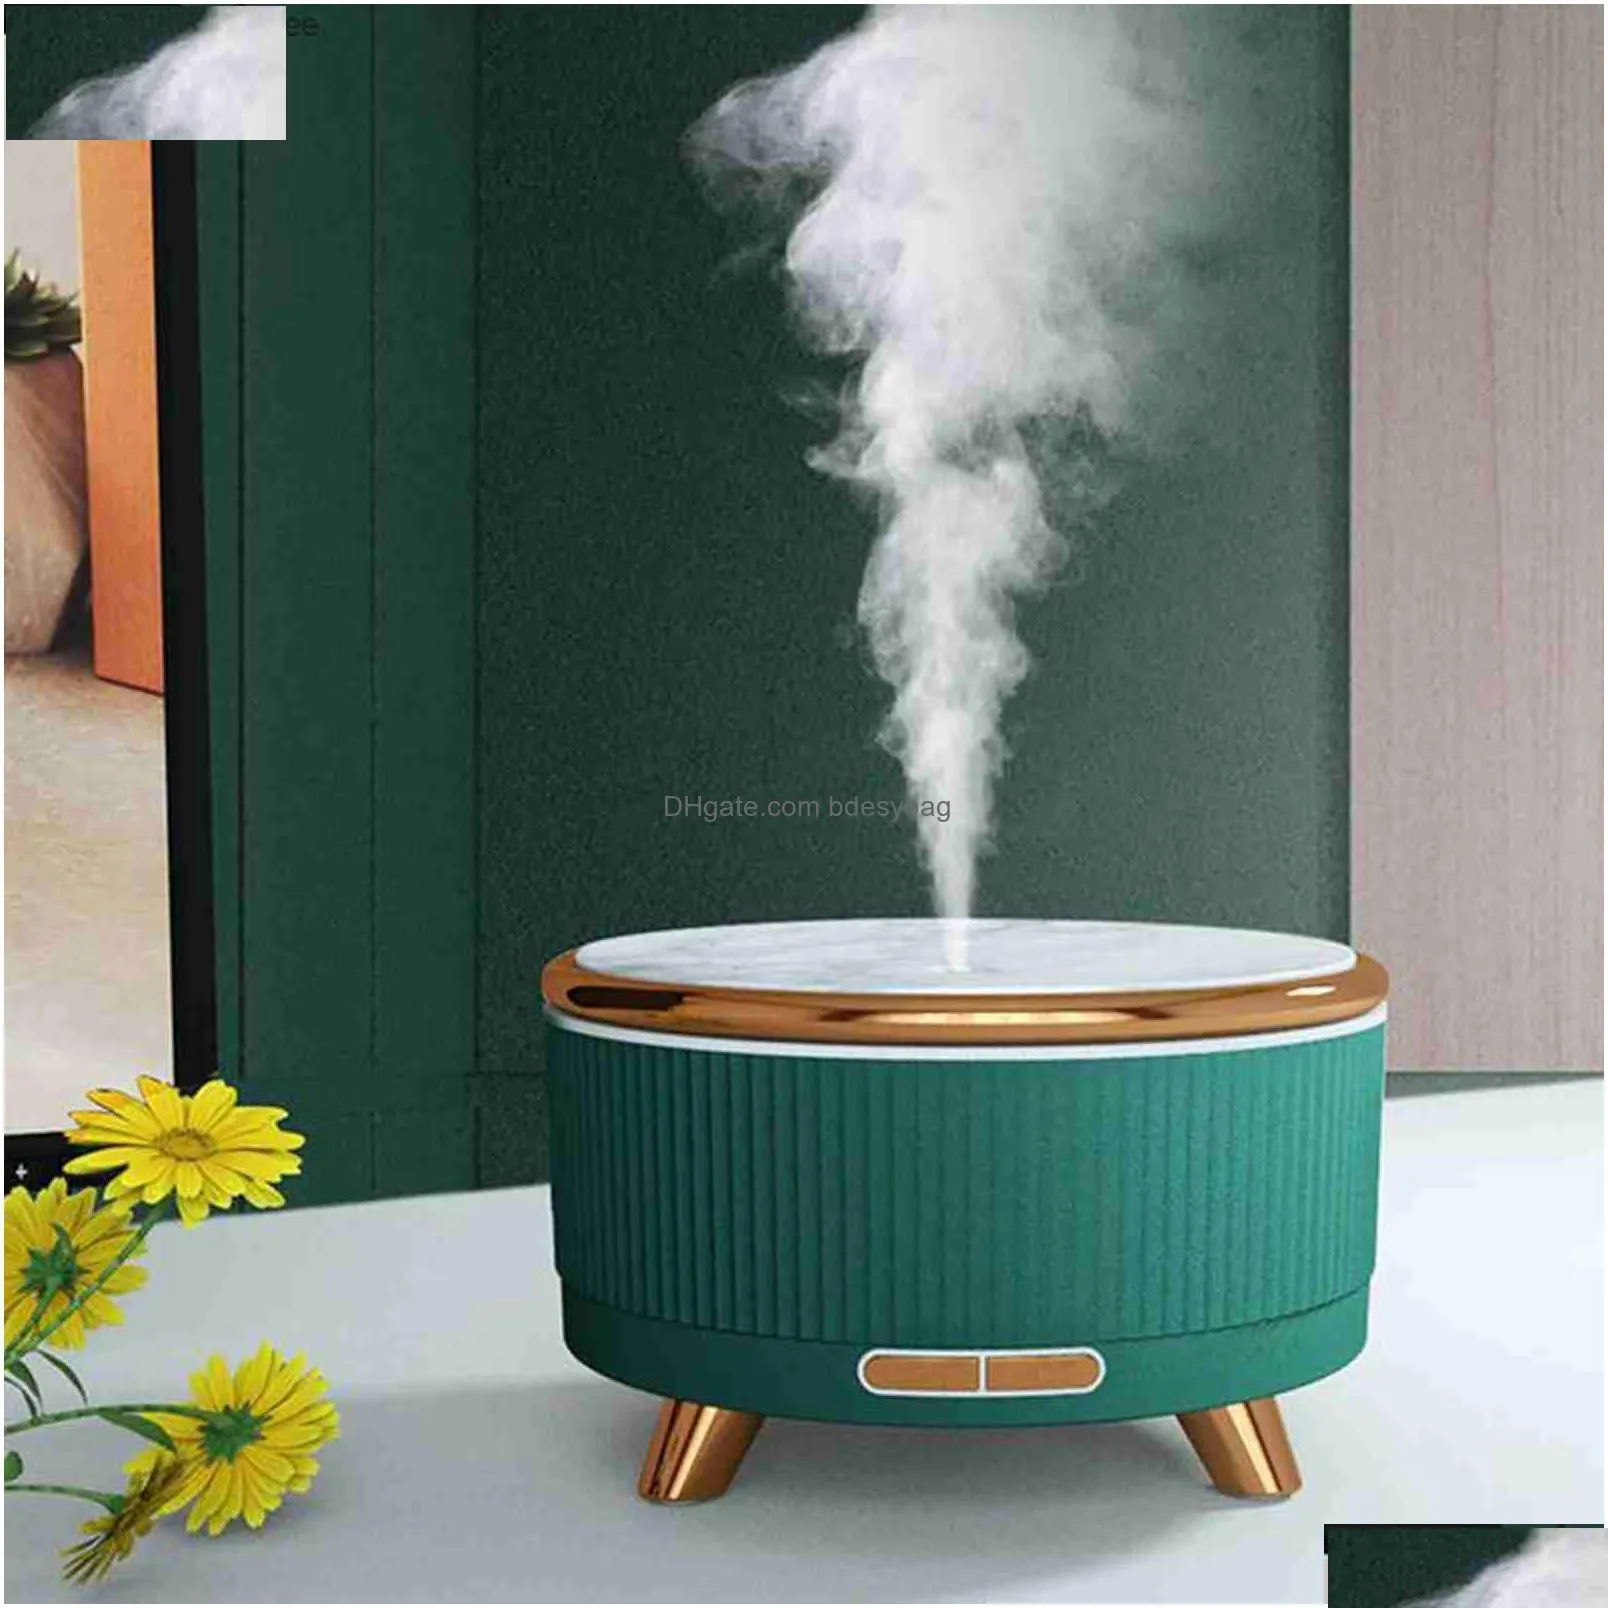 humidifiers nebulizing ultrasonic aromatherapy humidifier 7 led lights home fragrances antique style essential oil diffuser for spa desktop